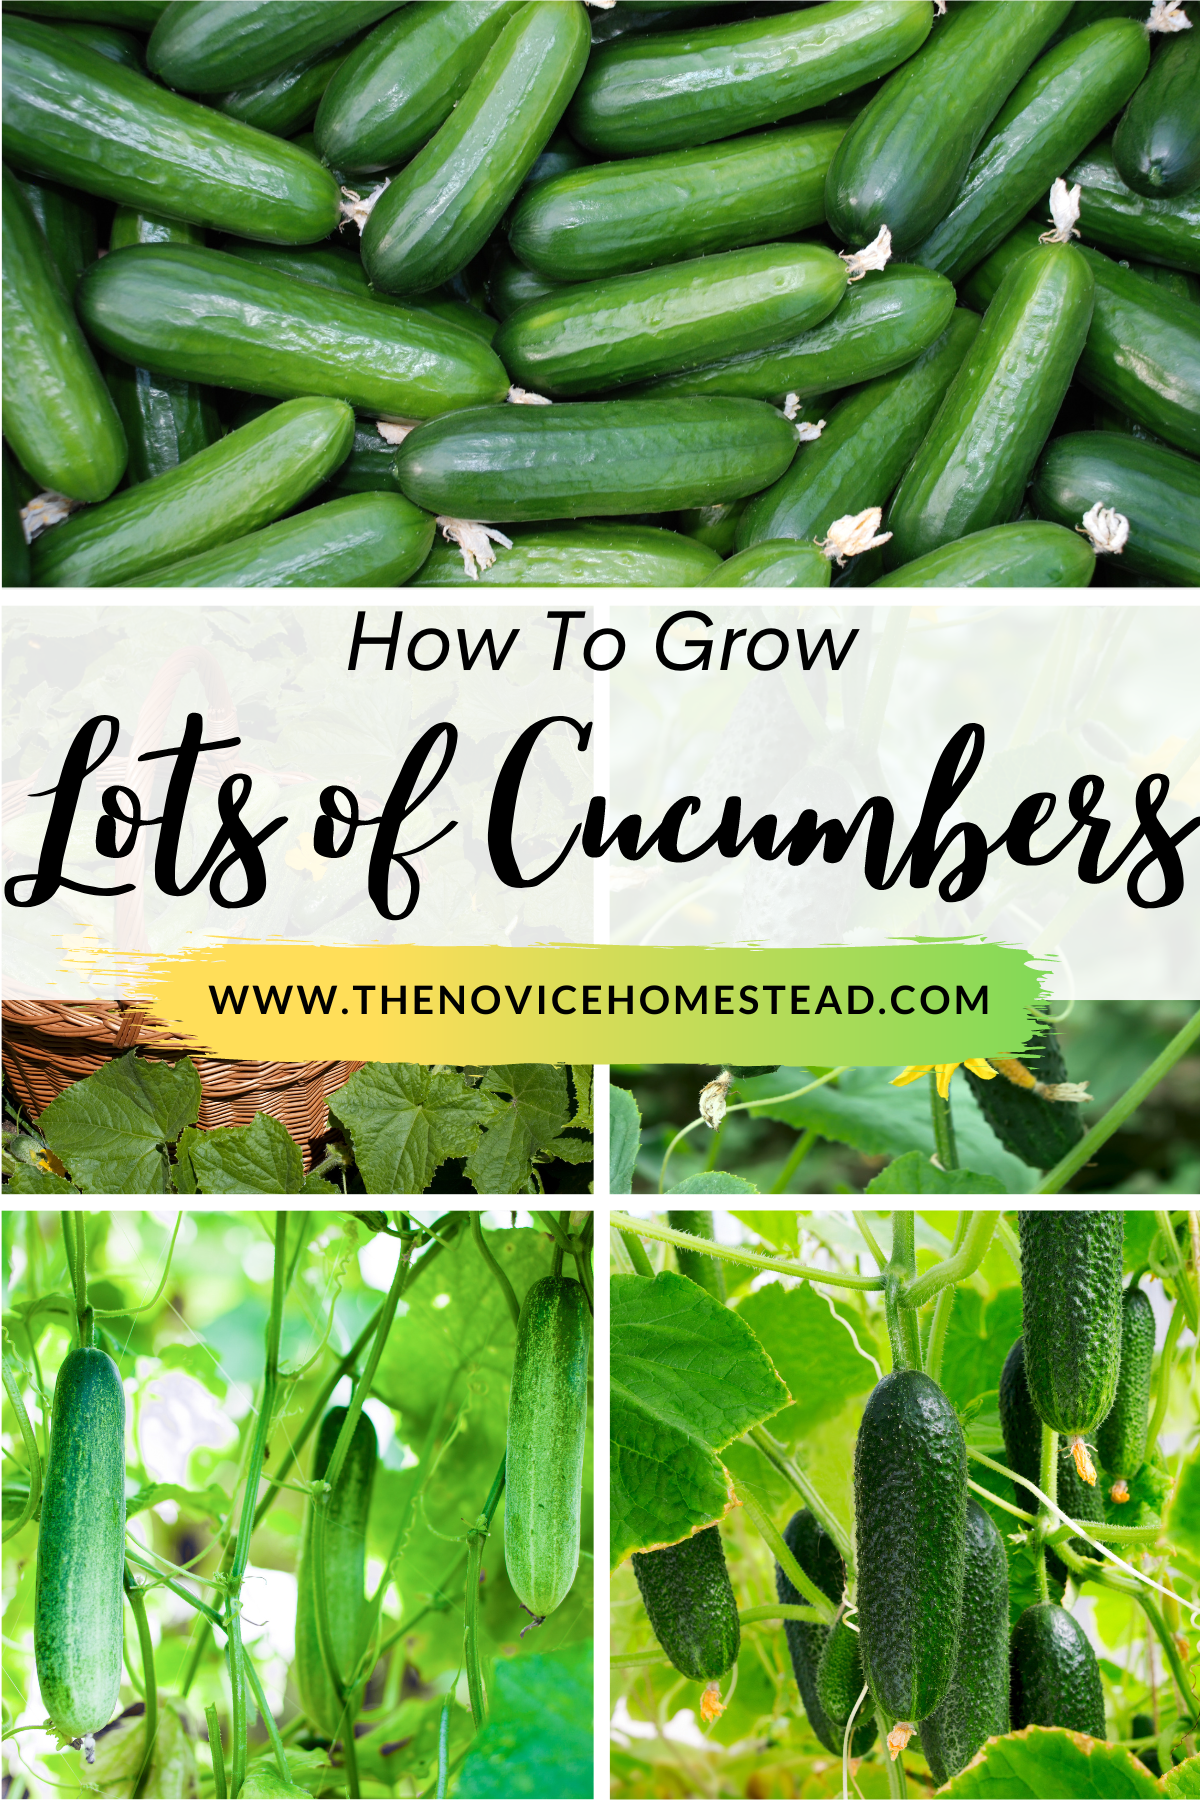 collage image of lots of ripe cucumbers; text overlay "How to Grow Lots of Cucumbers"